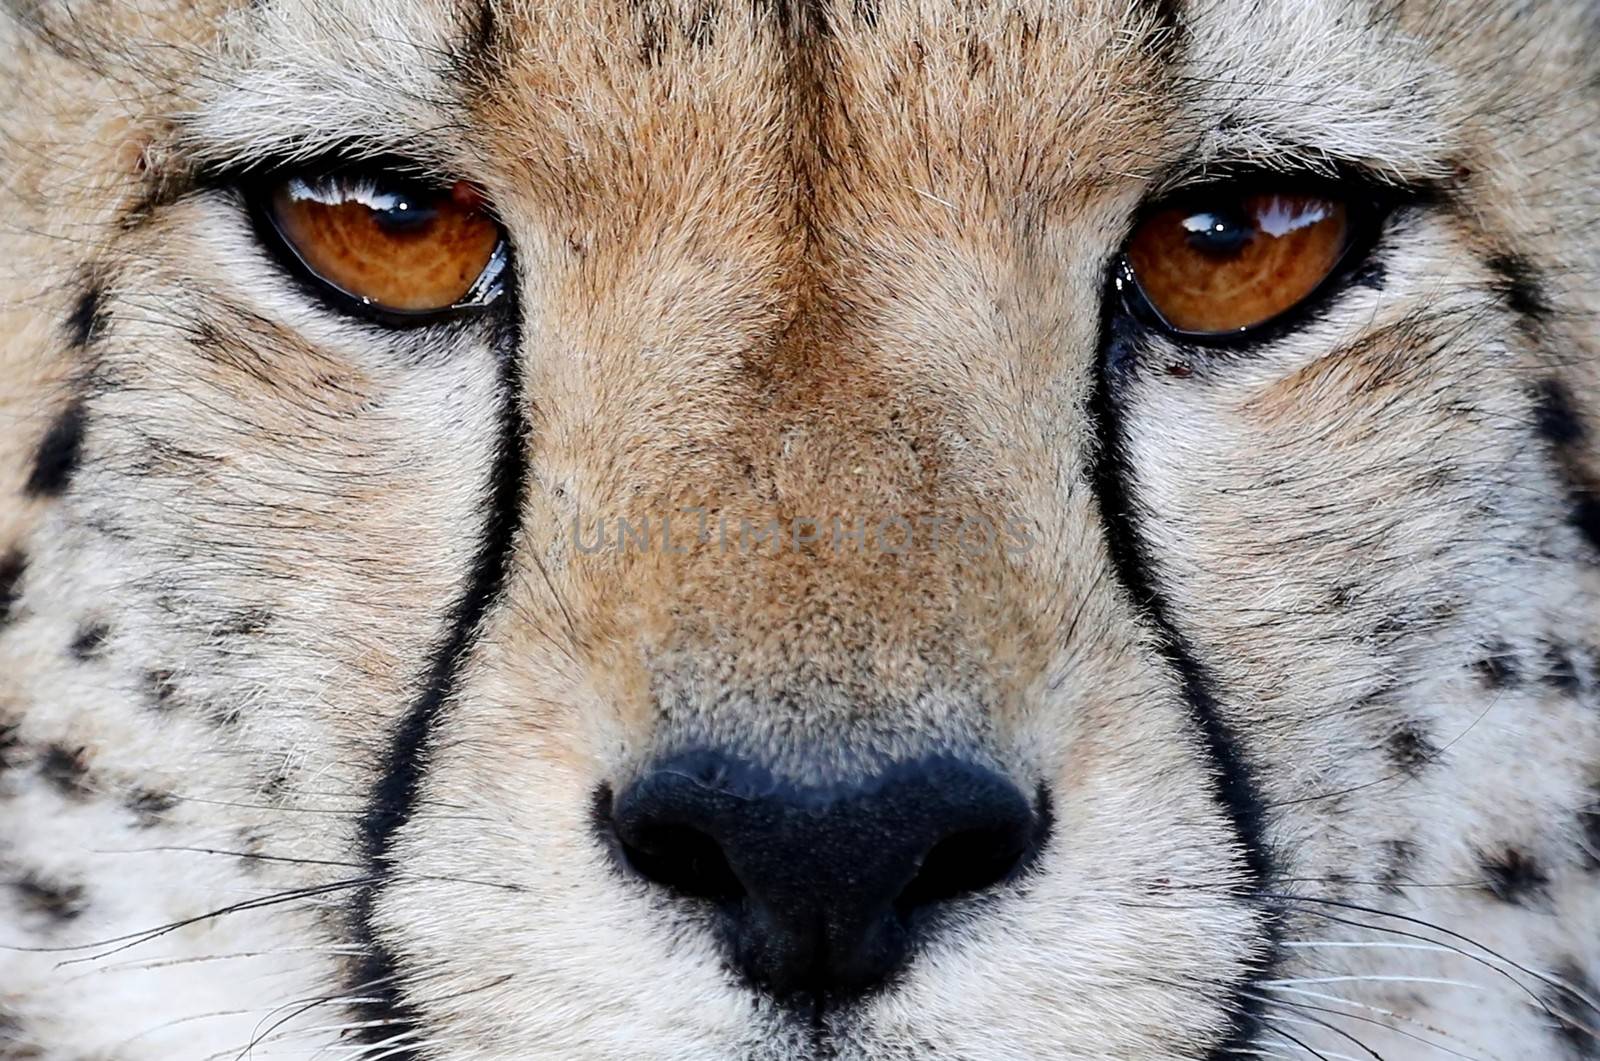 Close up of a Cheetah wild cat's striking brown eyes and black nose